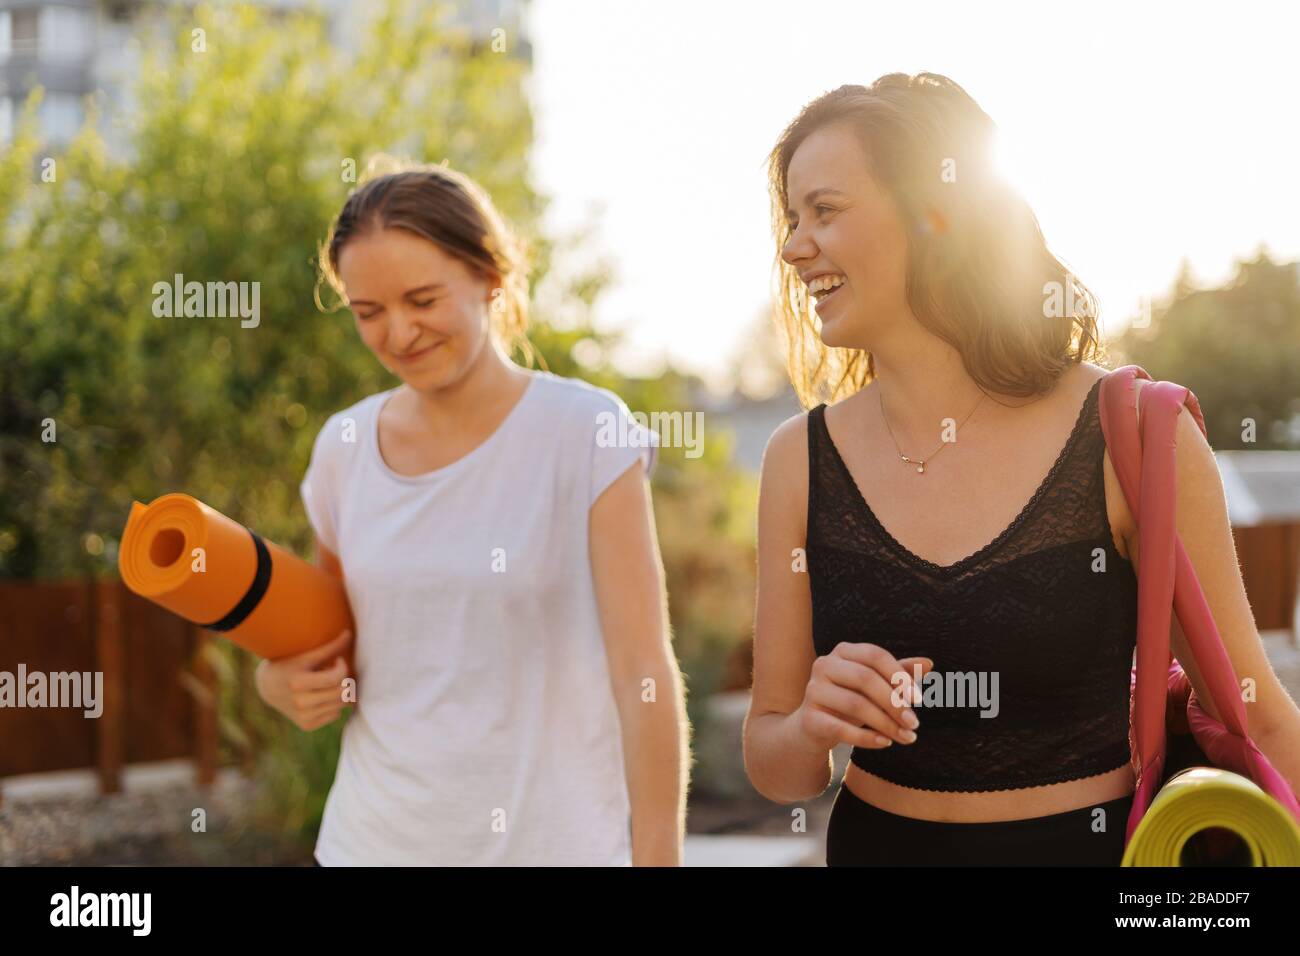 Two young beautiful women in sportswear going to do sports training, gymnastics, yoga. Healthy sports lifestyle concept. Women friendship Stock Photo